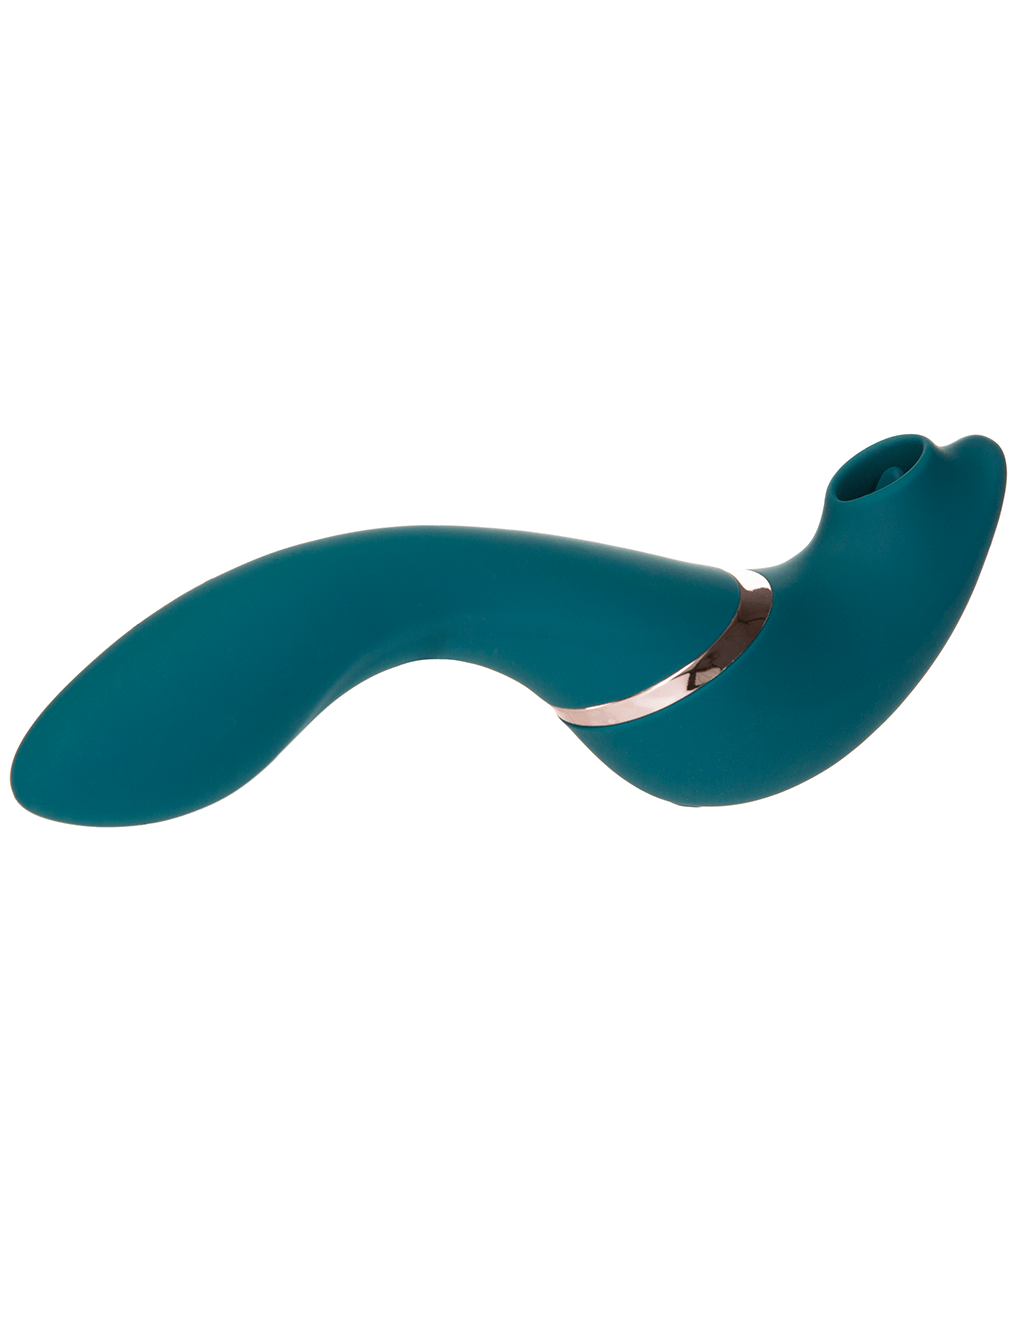 The Monarch Swan - Teal - Side